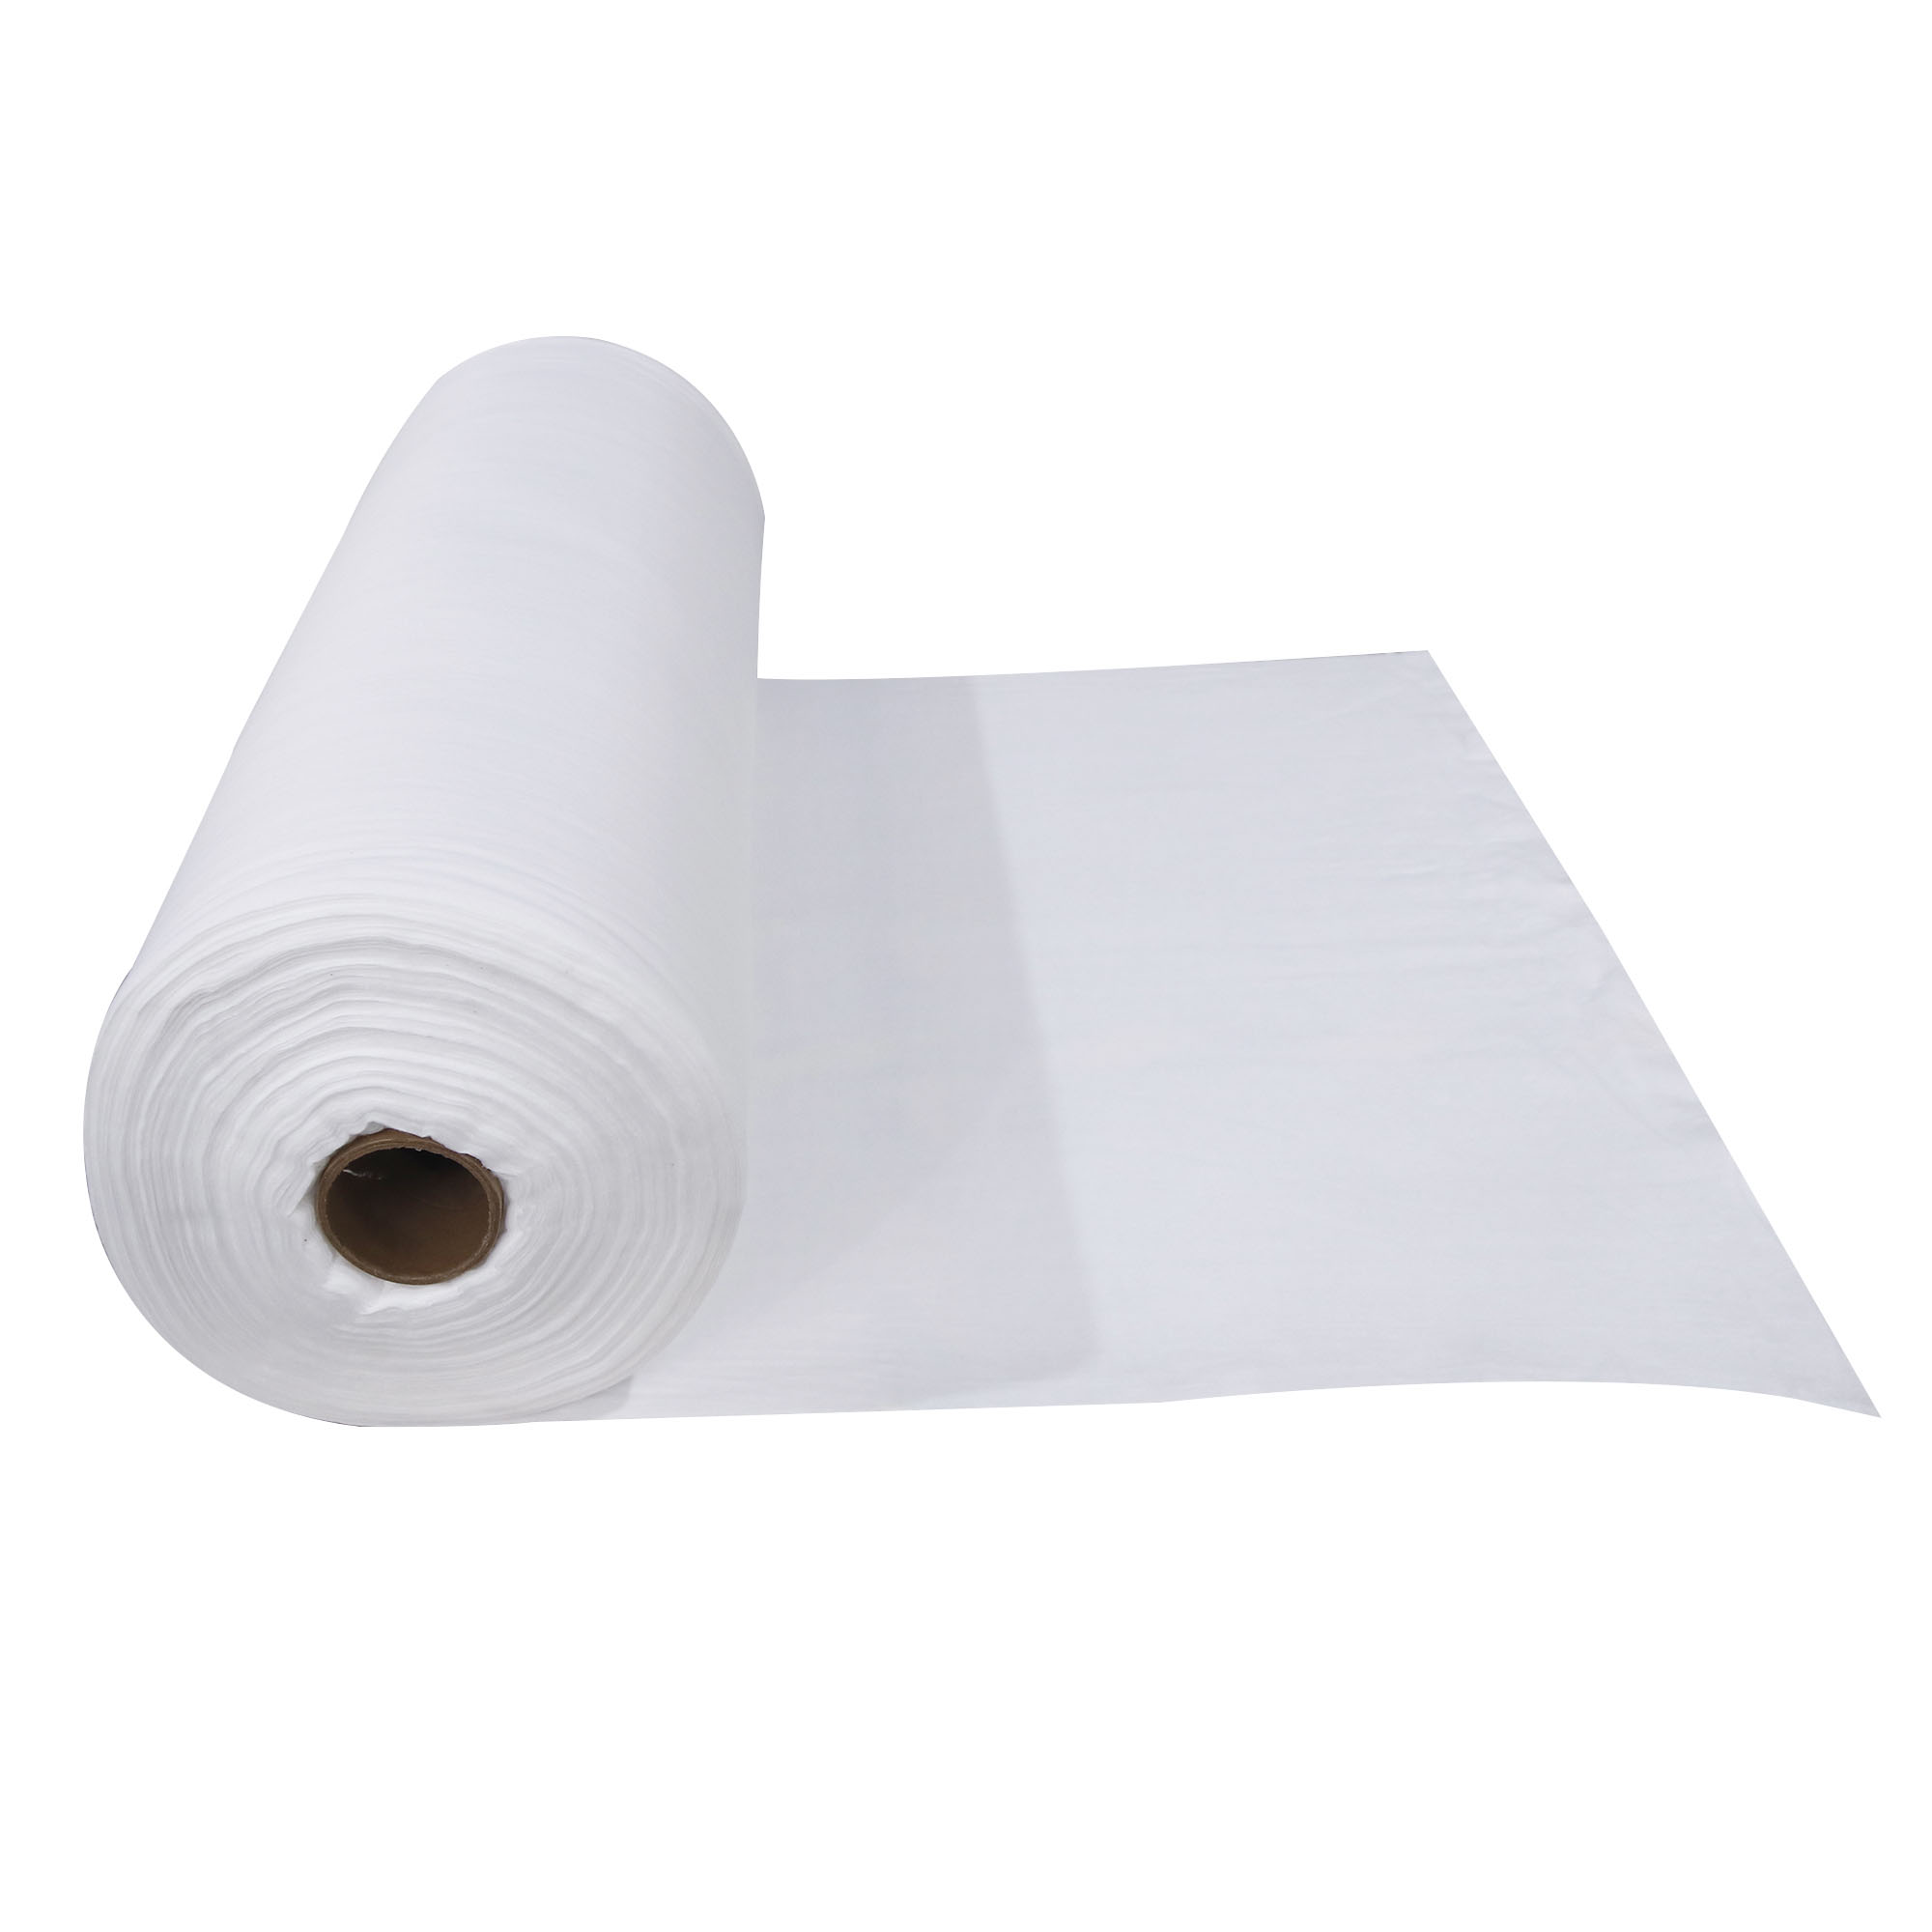 Medical Absorbent Cotton Roll Raw Material For Cotton Buds/ Cotton Balls/ Cotton Swabs